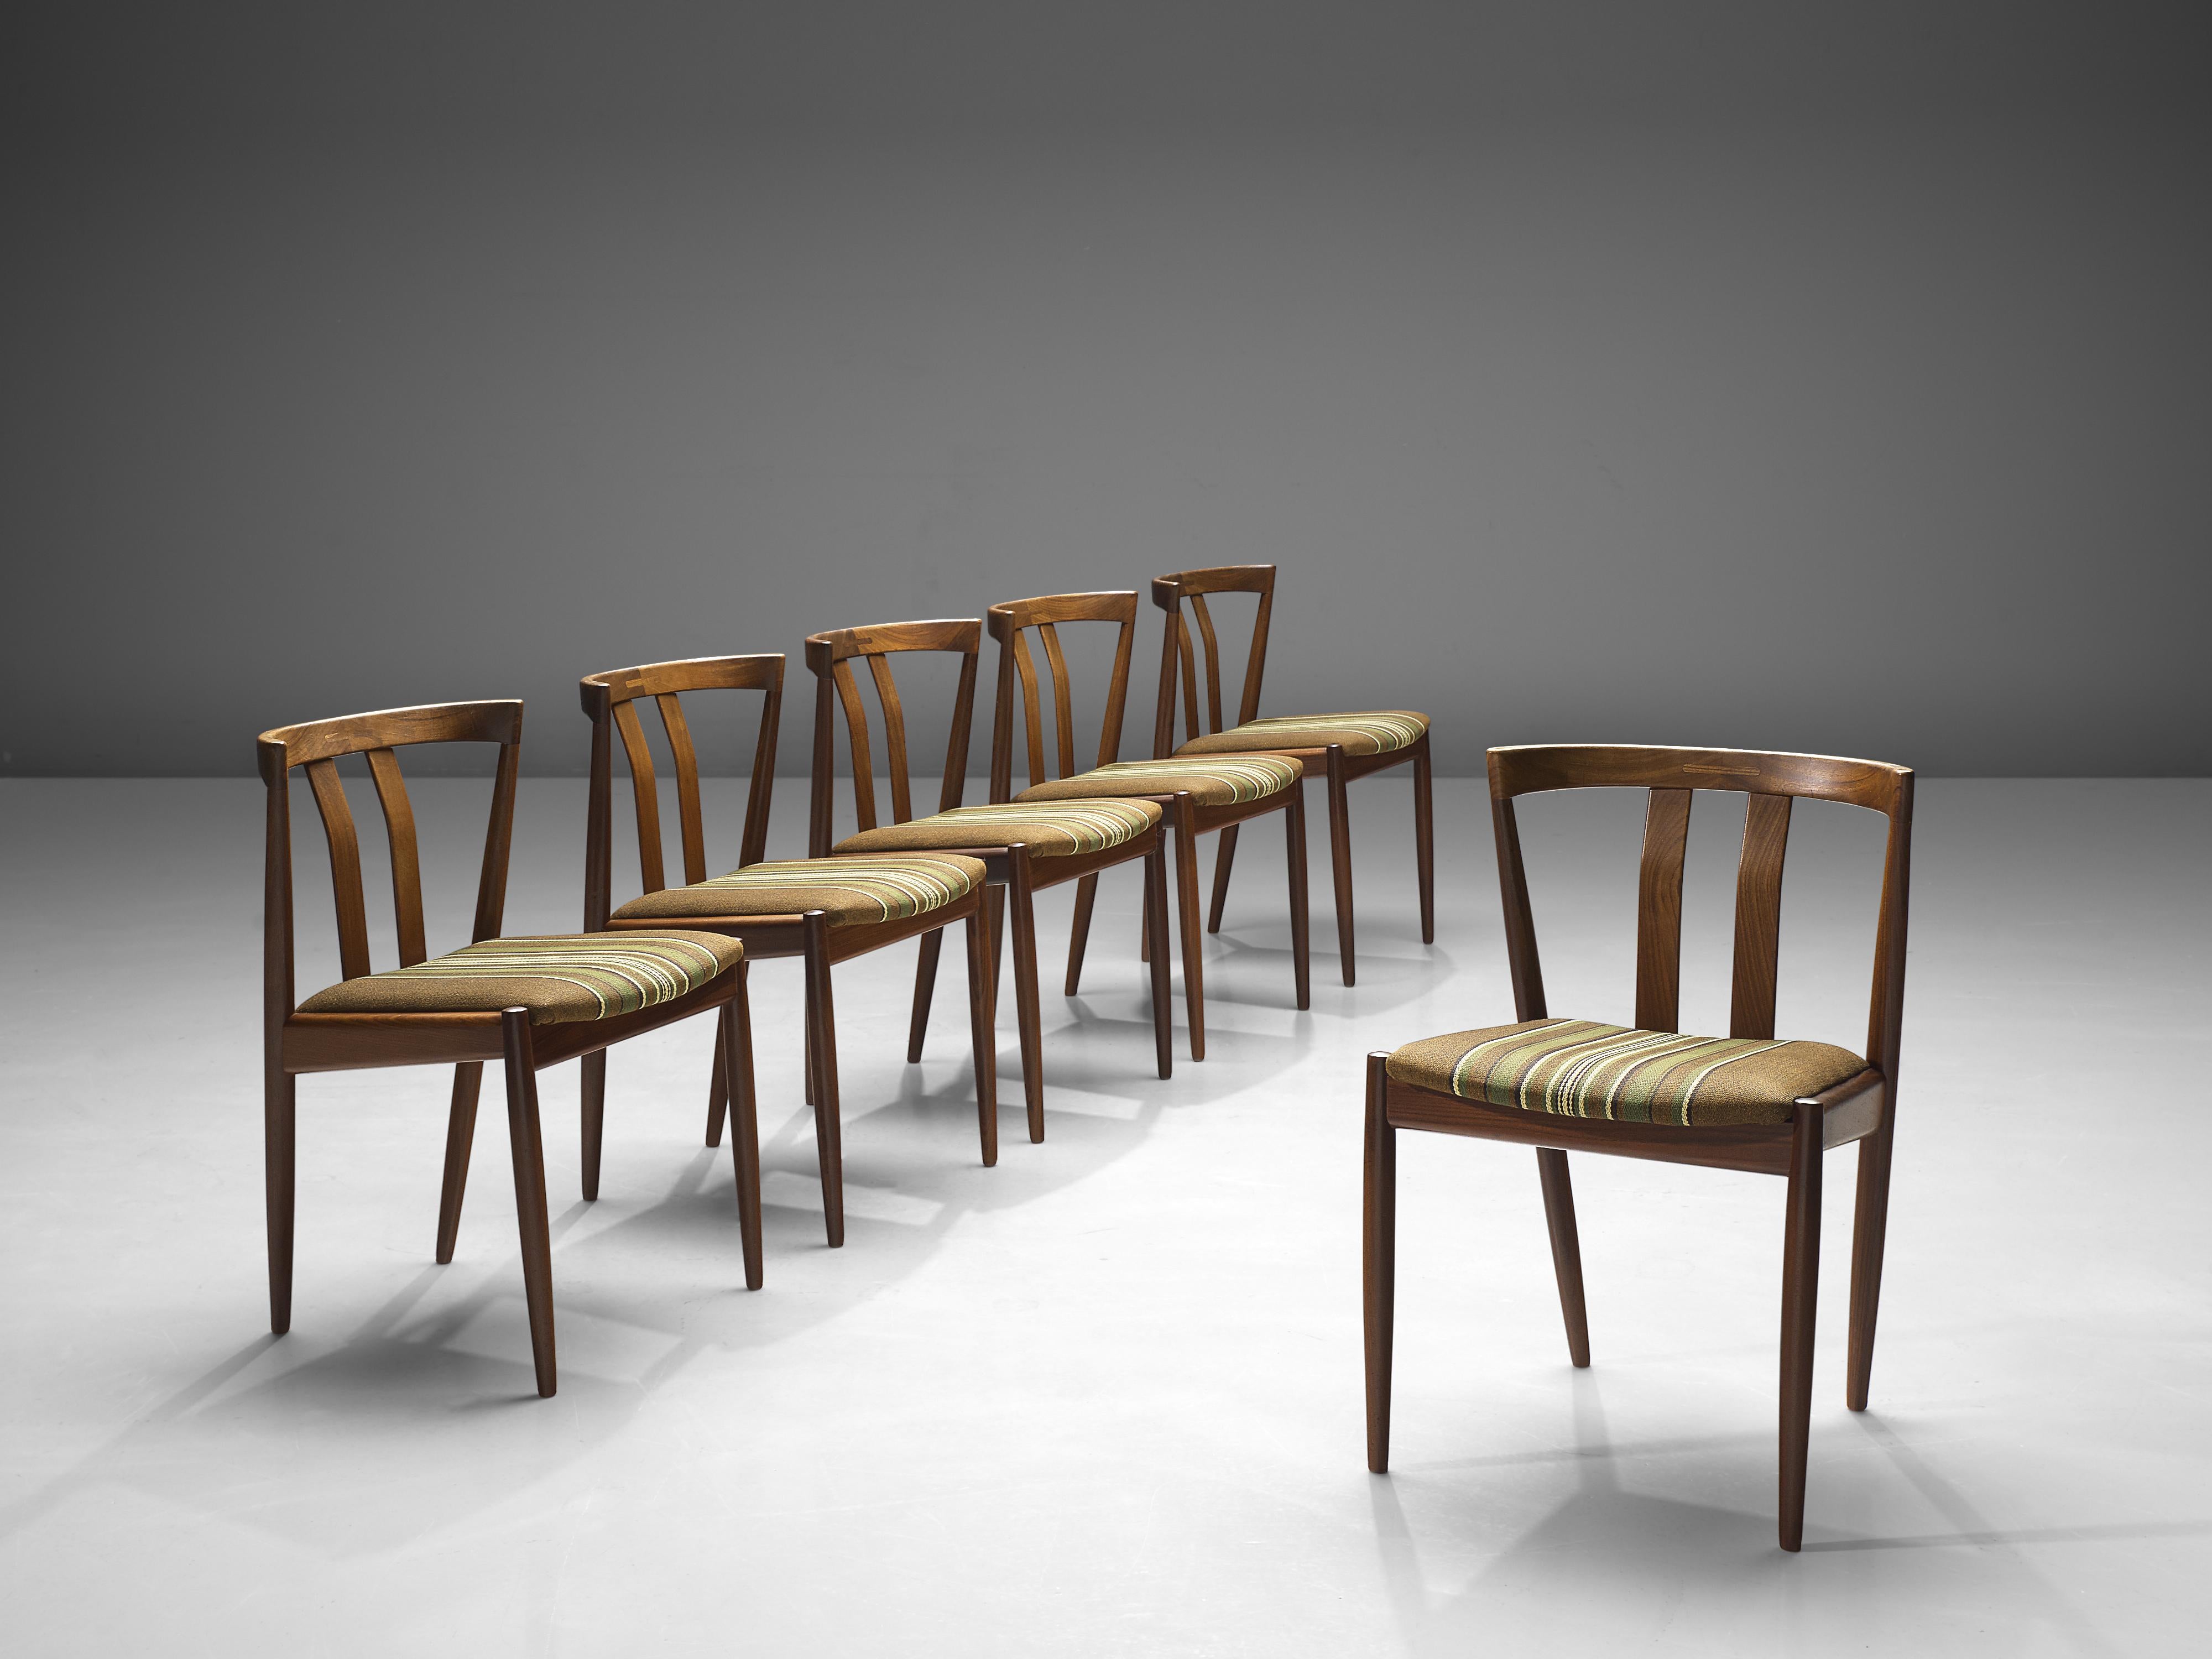 Set of six dining chairs, teak and wool, Denmark, 1960s

Elegant set of six Danish dining chairs featuring an open back with two slats, diagonal back legs that run all the way through to the backrest. This set is playful and dynamic yet also bears